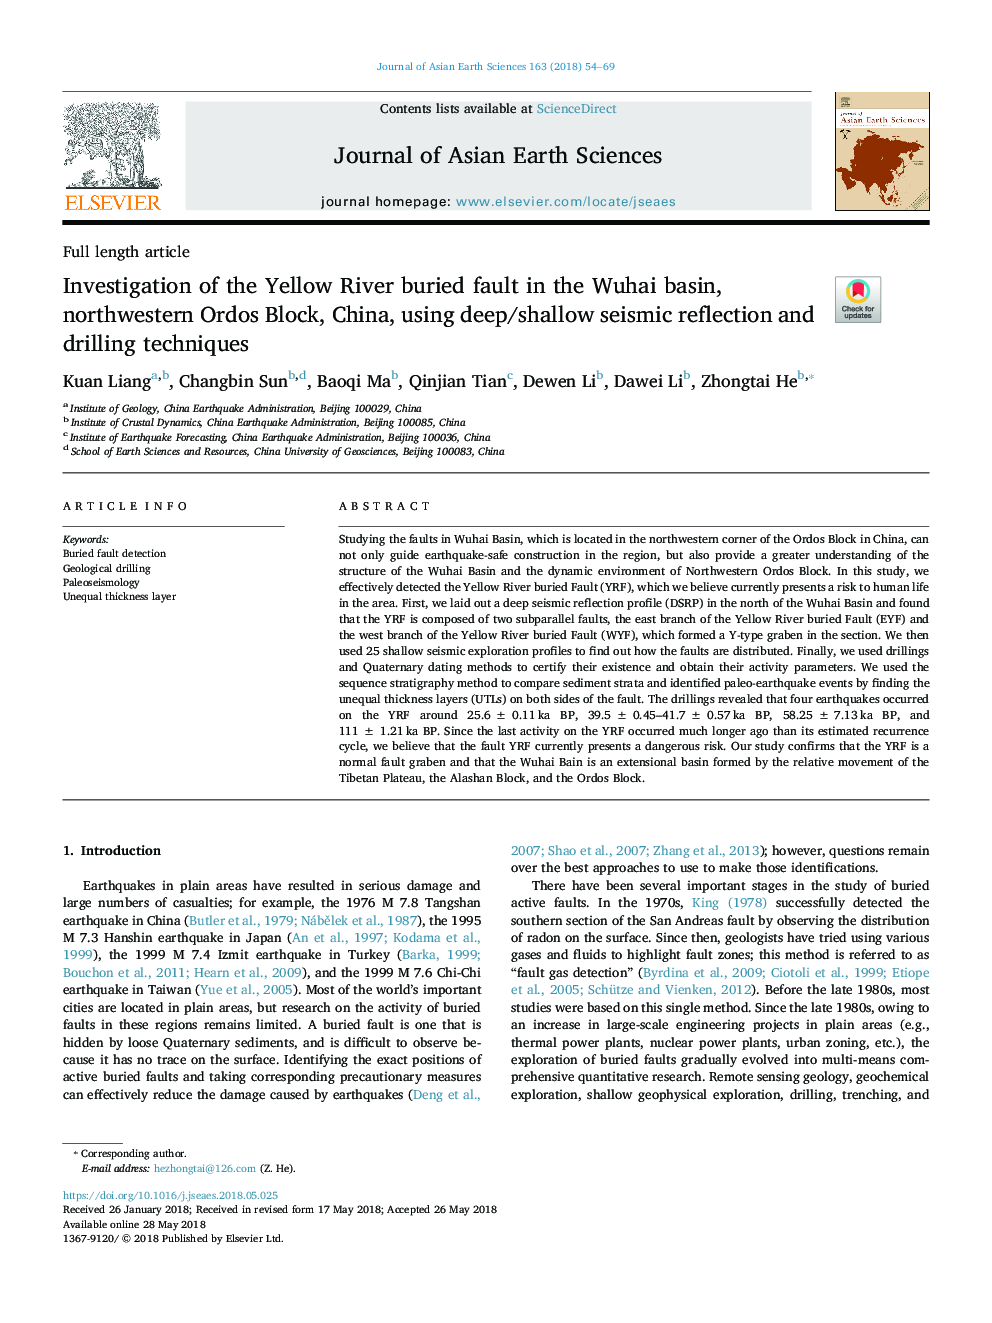 Investigation of the Yellow River buried fault in the Wuhai basin, northwestern Ordos Block, China, using deep/shallow seismic reflection and drilling techniques